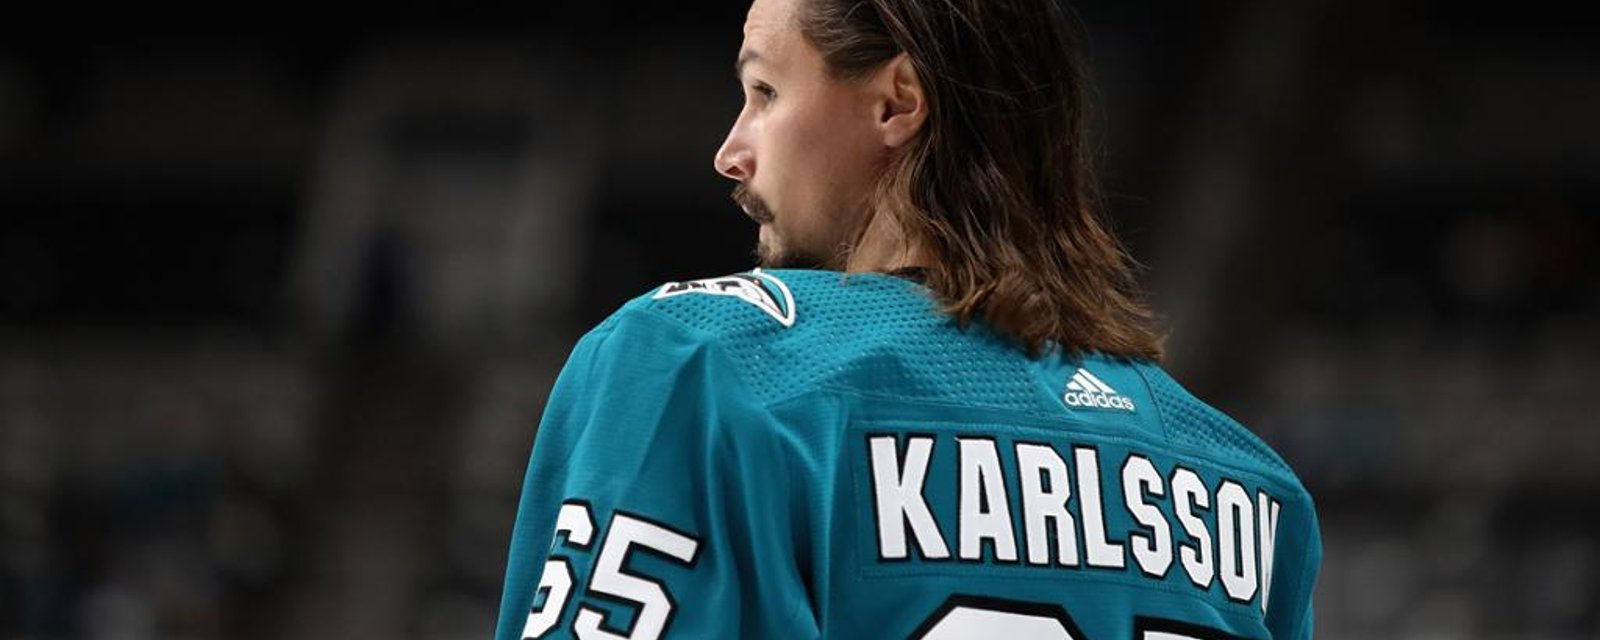 Karlsson to leave San Jose for New York?! 